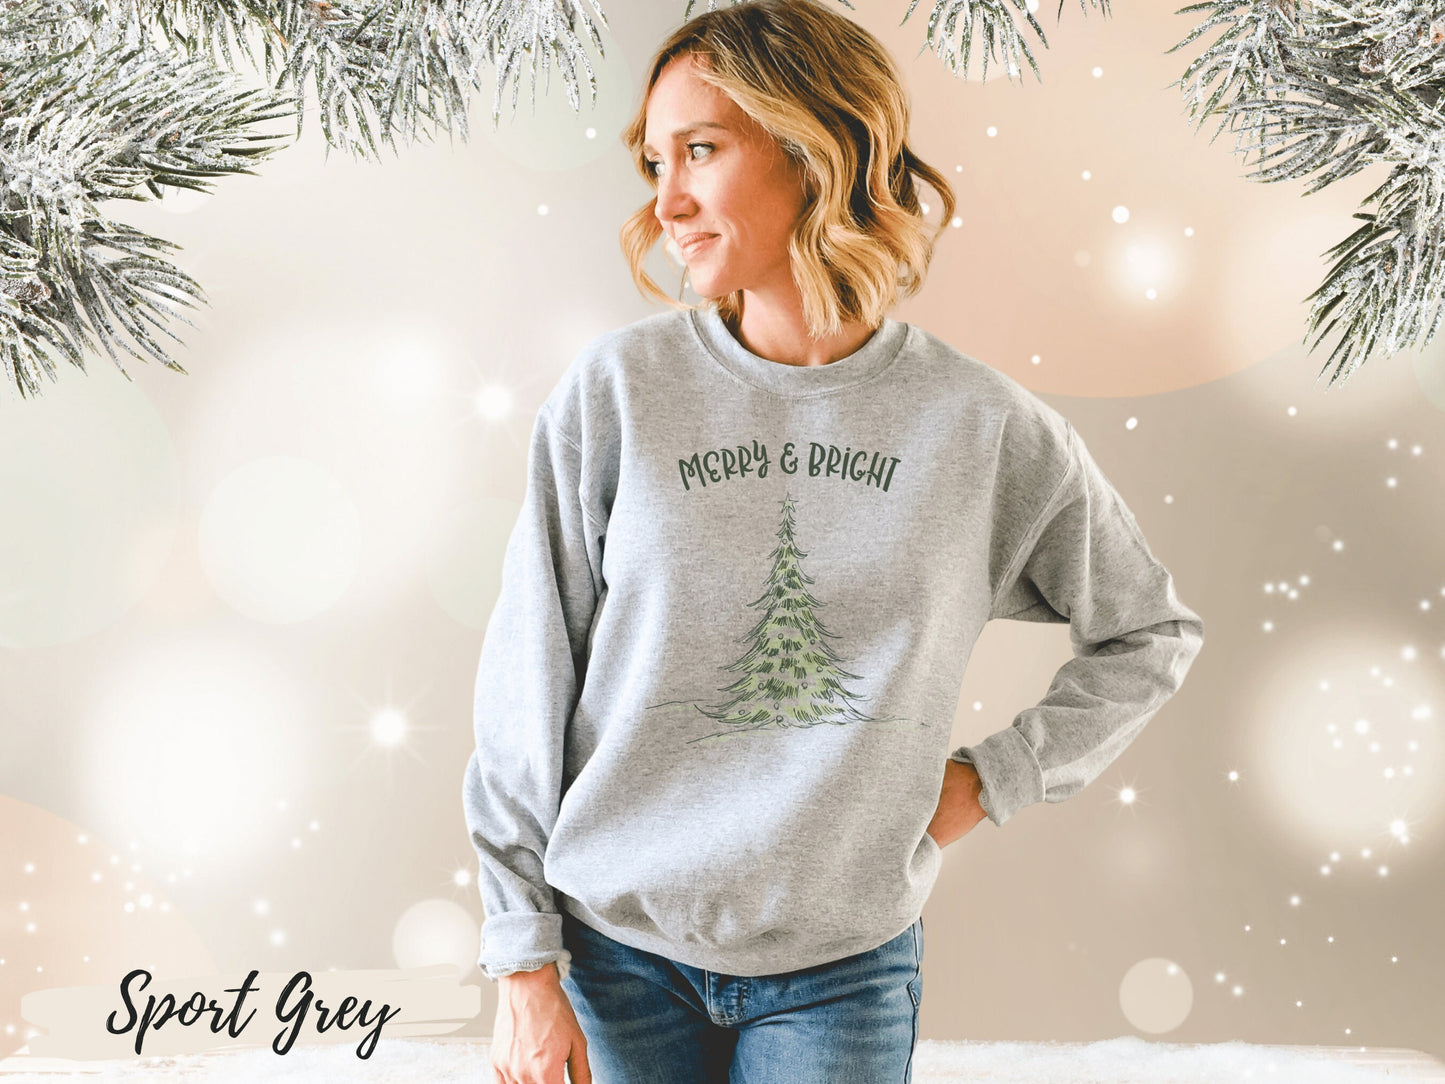 Merry and Bright Sweatshirt, Merry and Bright Sweatshirt, Merry and Christmas Sweatshirt, Gift for Christmas, Ugly Sweater Shirt